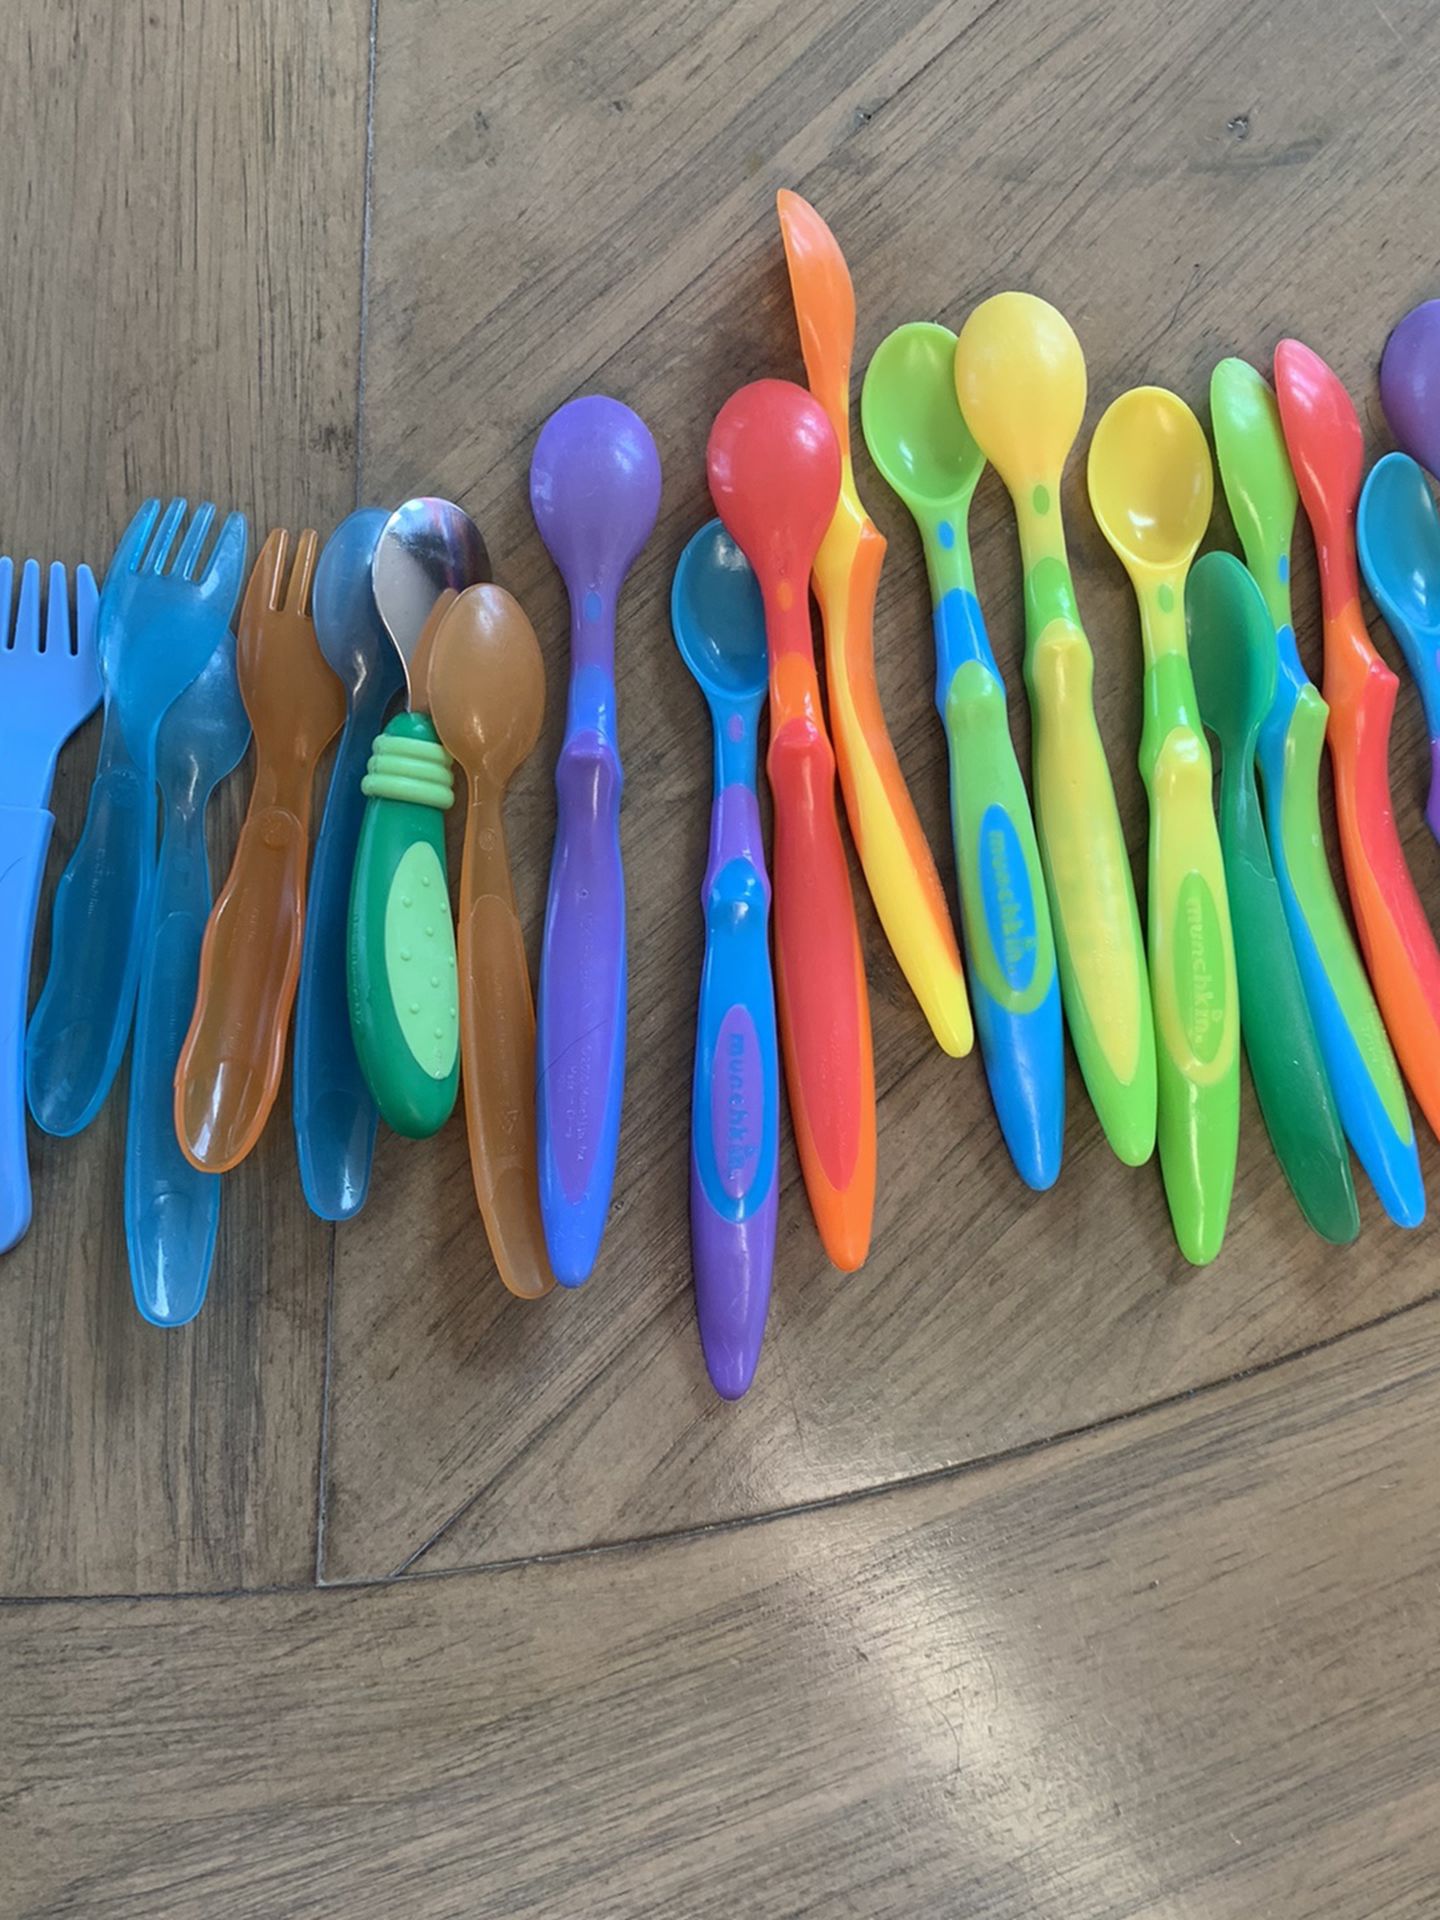 Baby Spoons And Forks (I am throwing out soon)